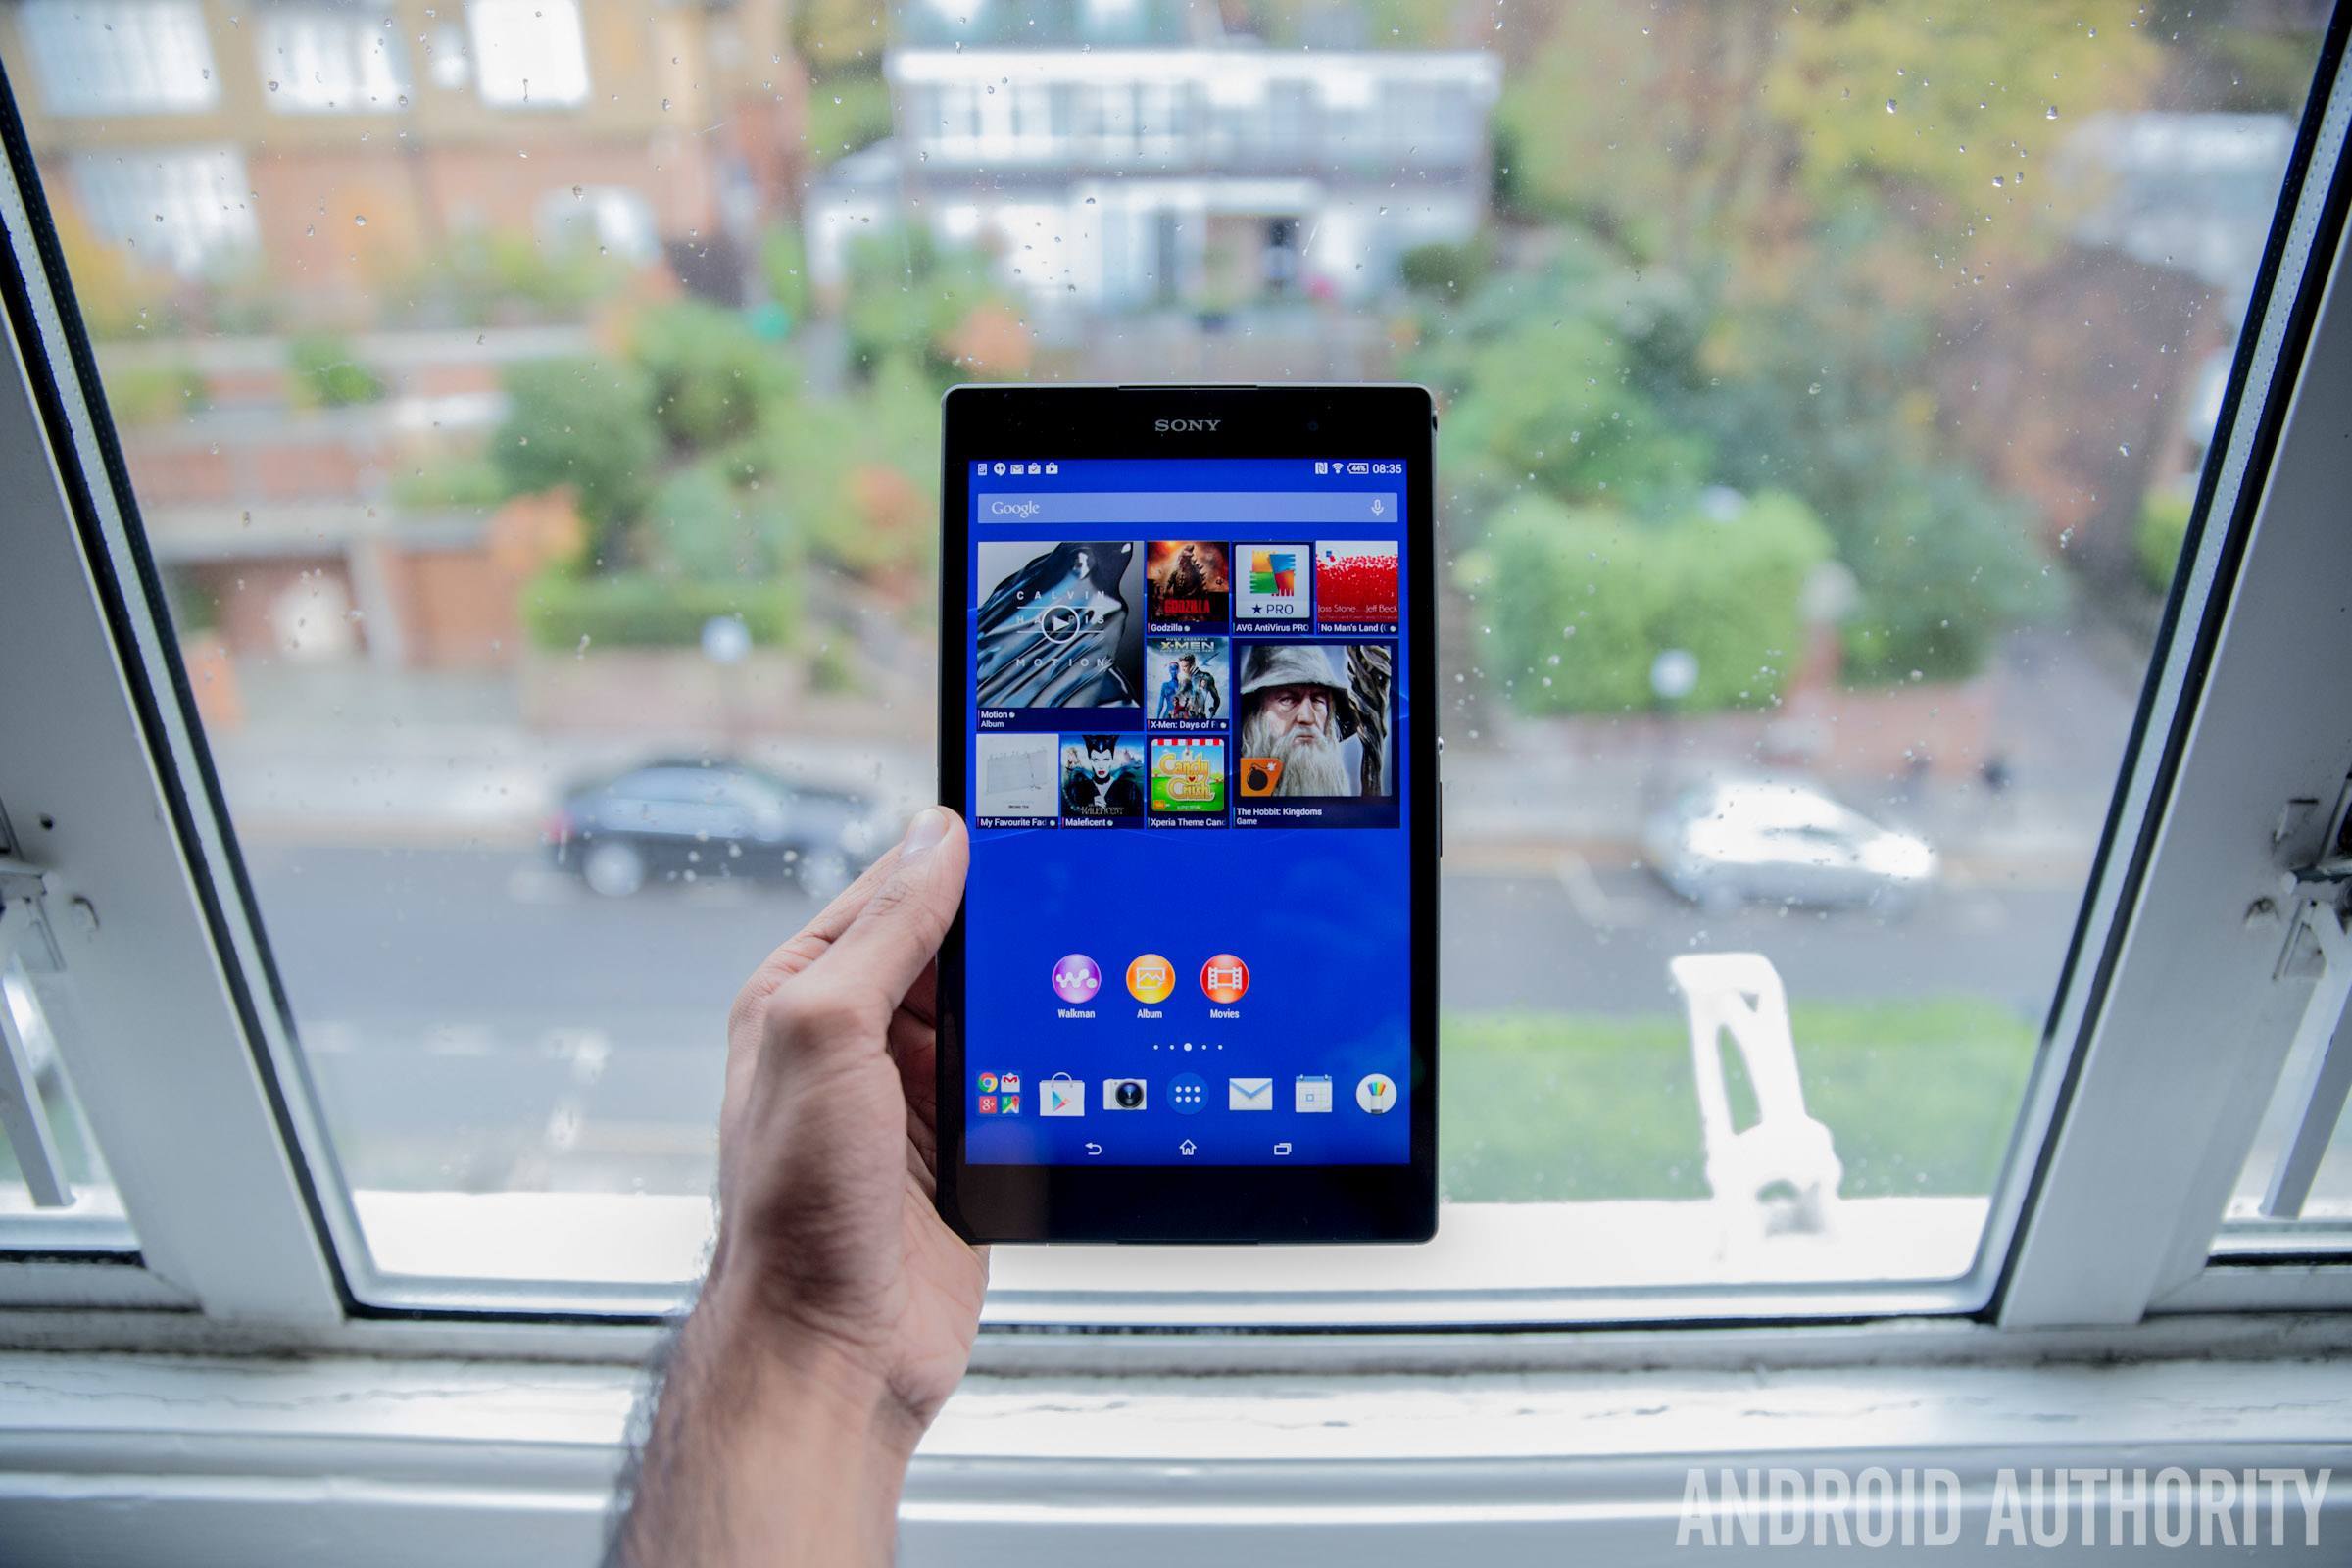 Sony Xperia Z3 Tablet Compact unboxing and first impressions